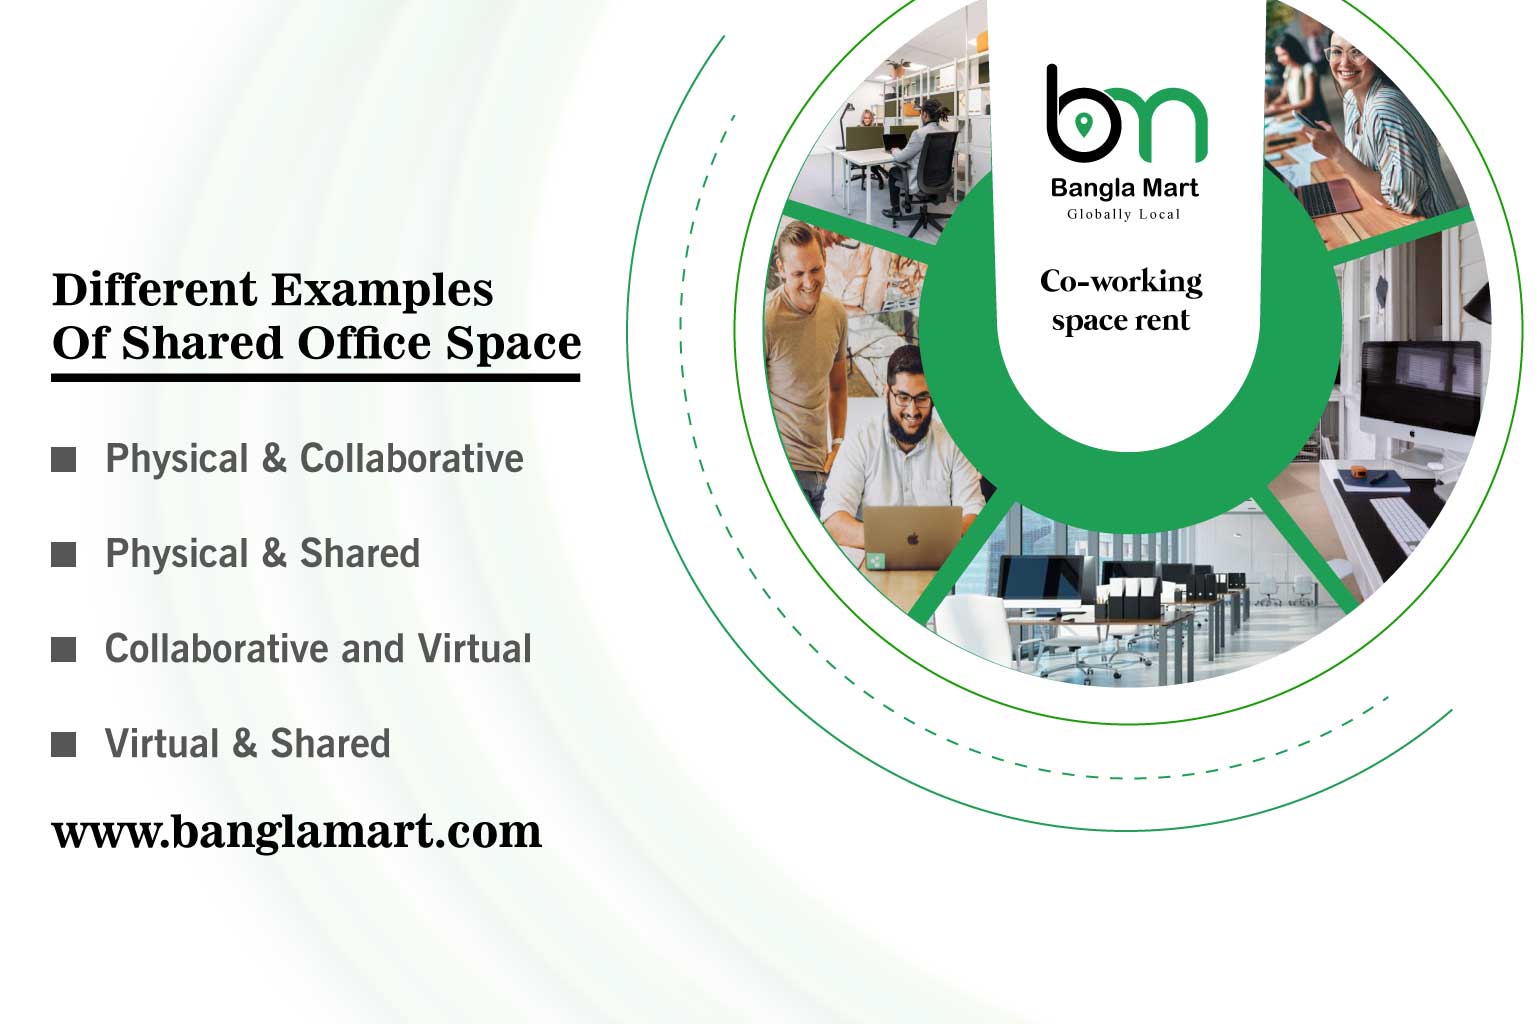 Different Examples Of Shared Office Space